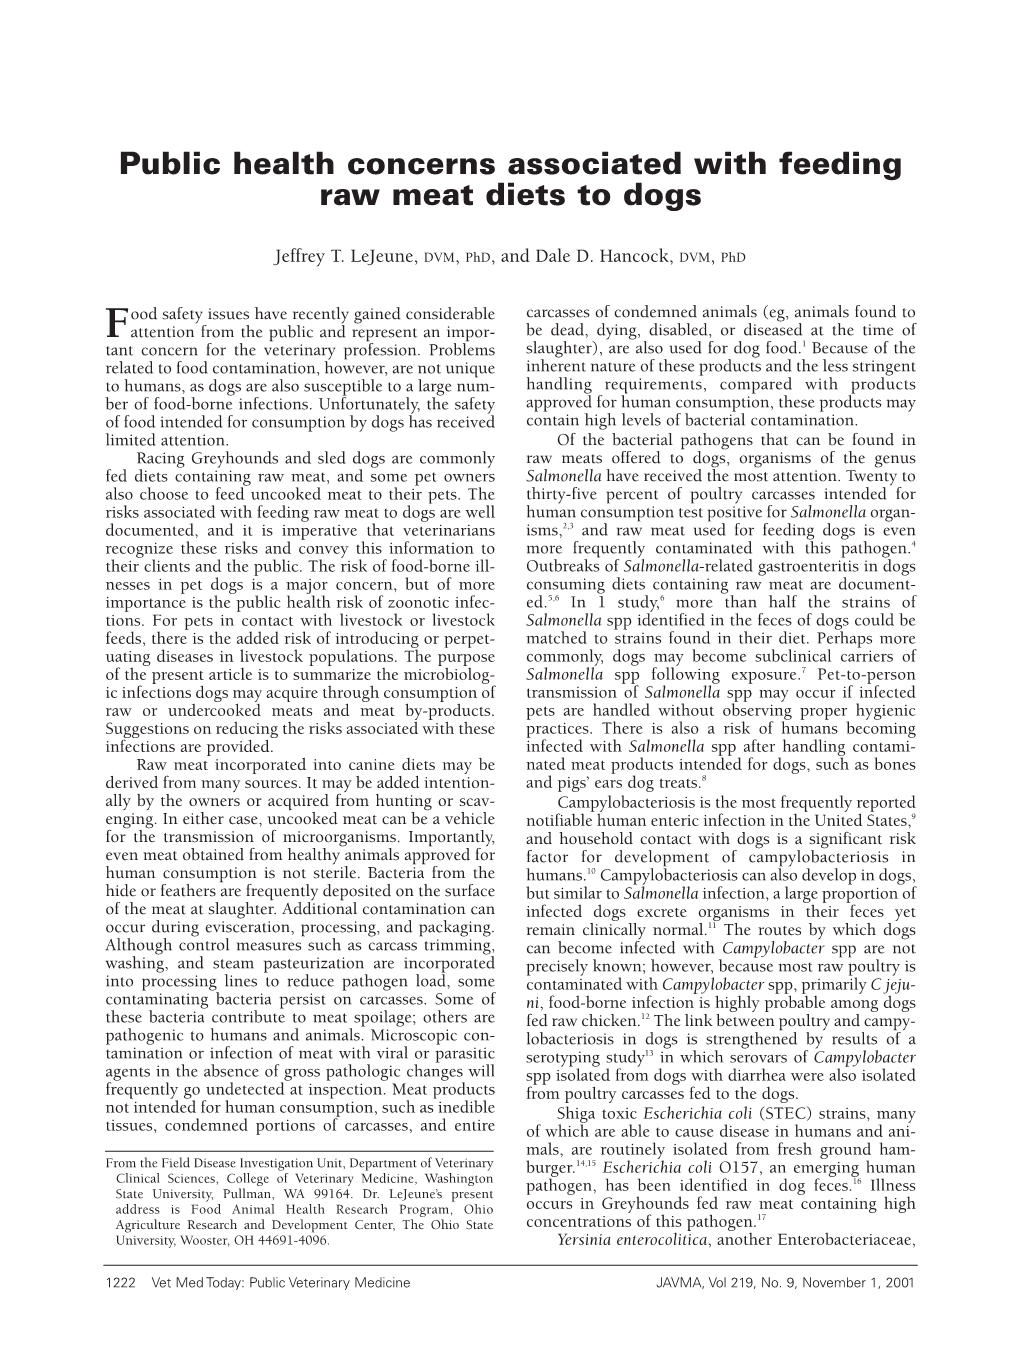 Public Health Concerns Associated with Feeding Raw Meat Diets to Dogs